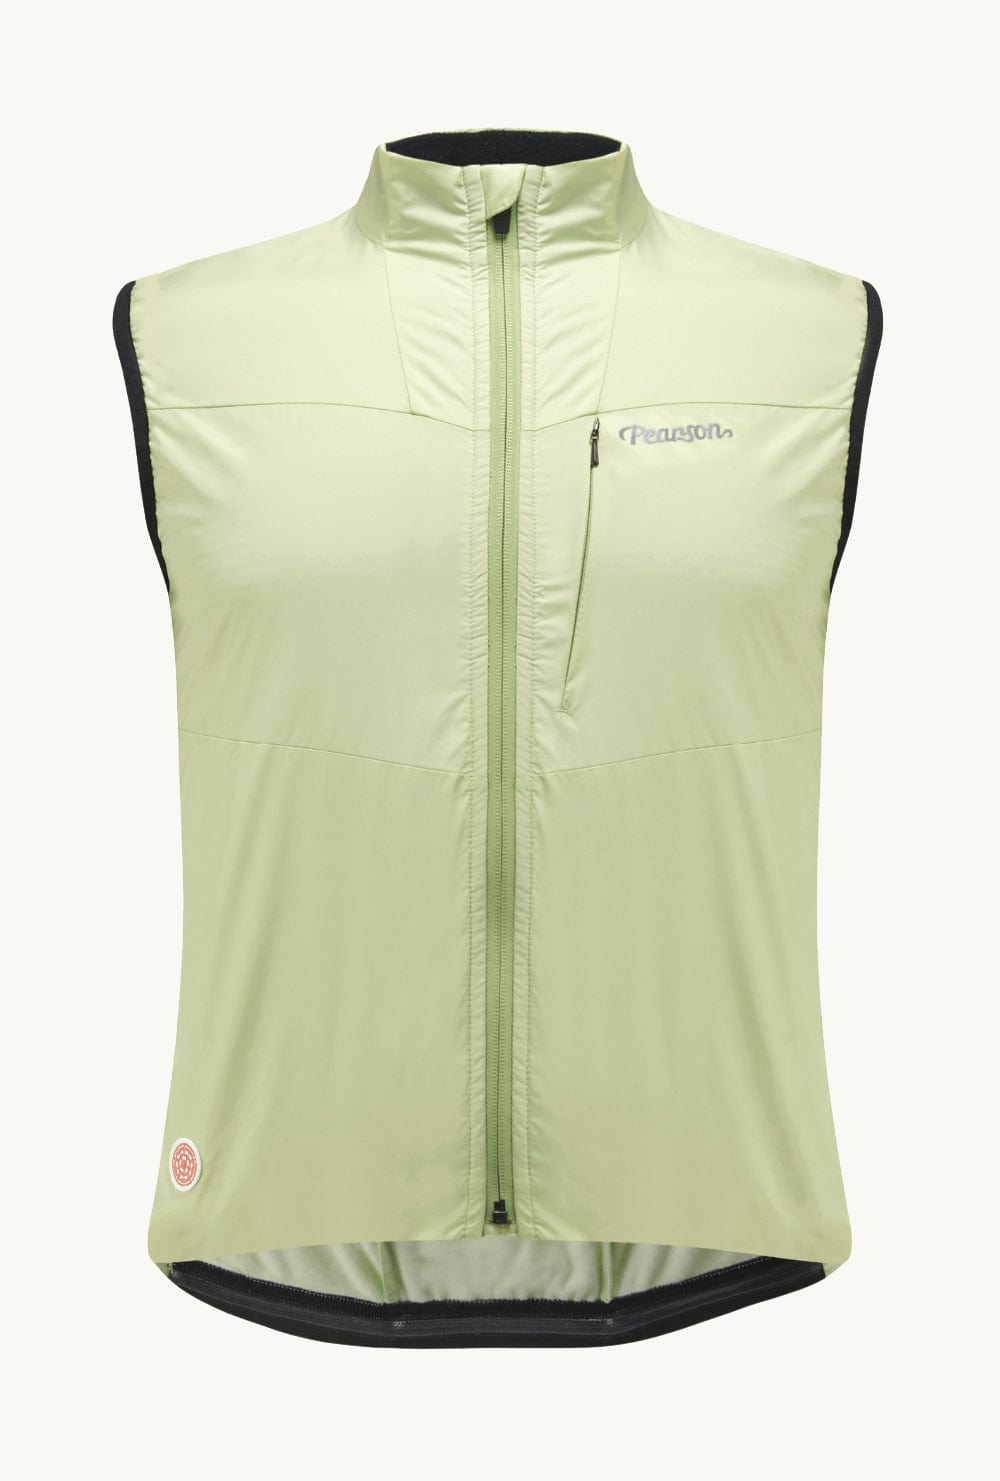 Pearson 1860  Feel The Benefits - Road Insulated Gilet Shadow Lime  Large / Shadow Lime